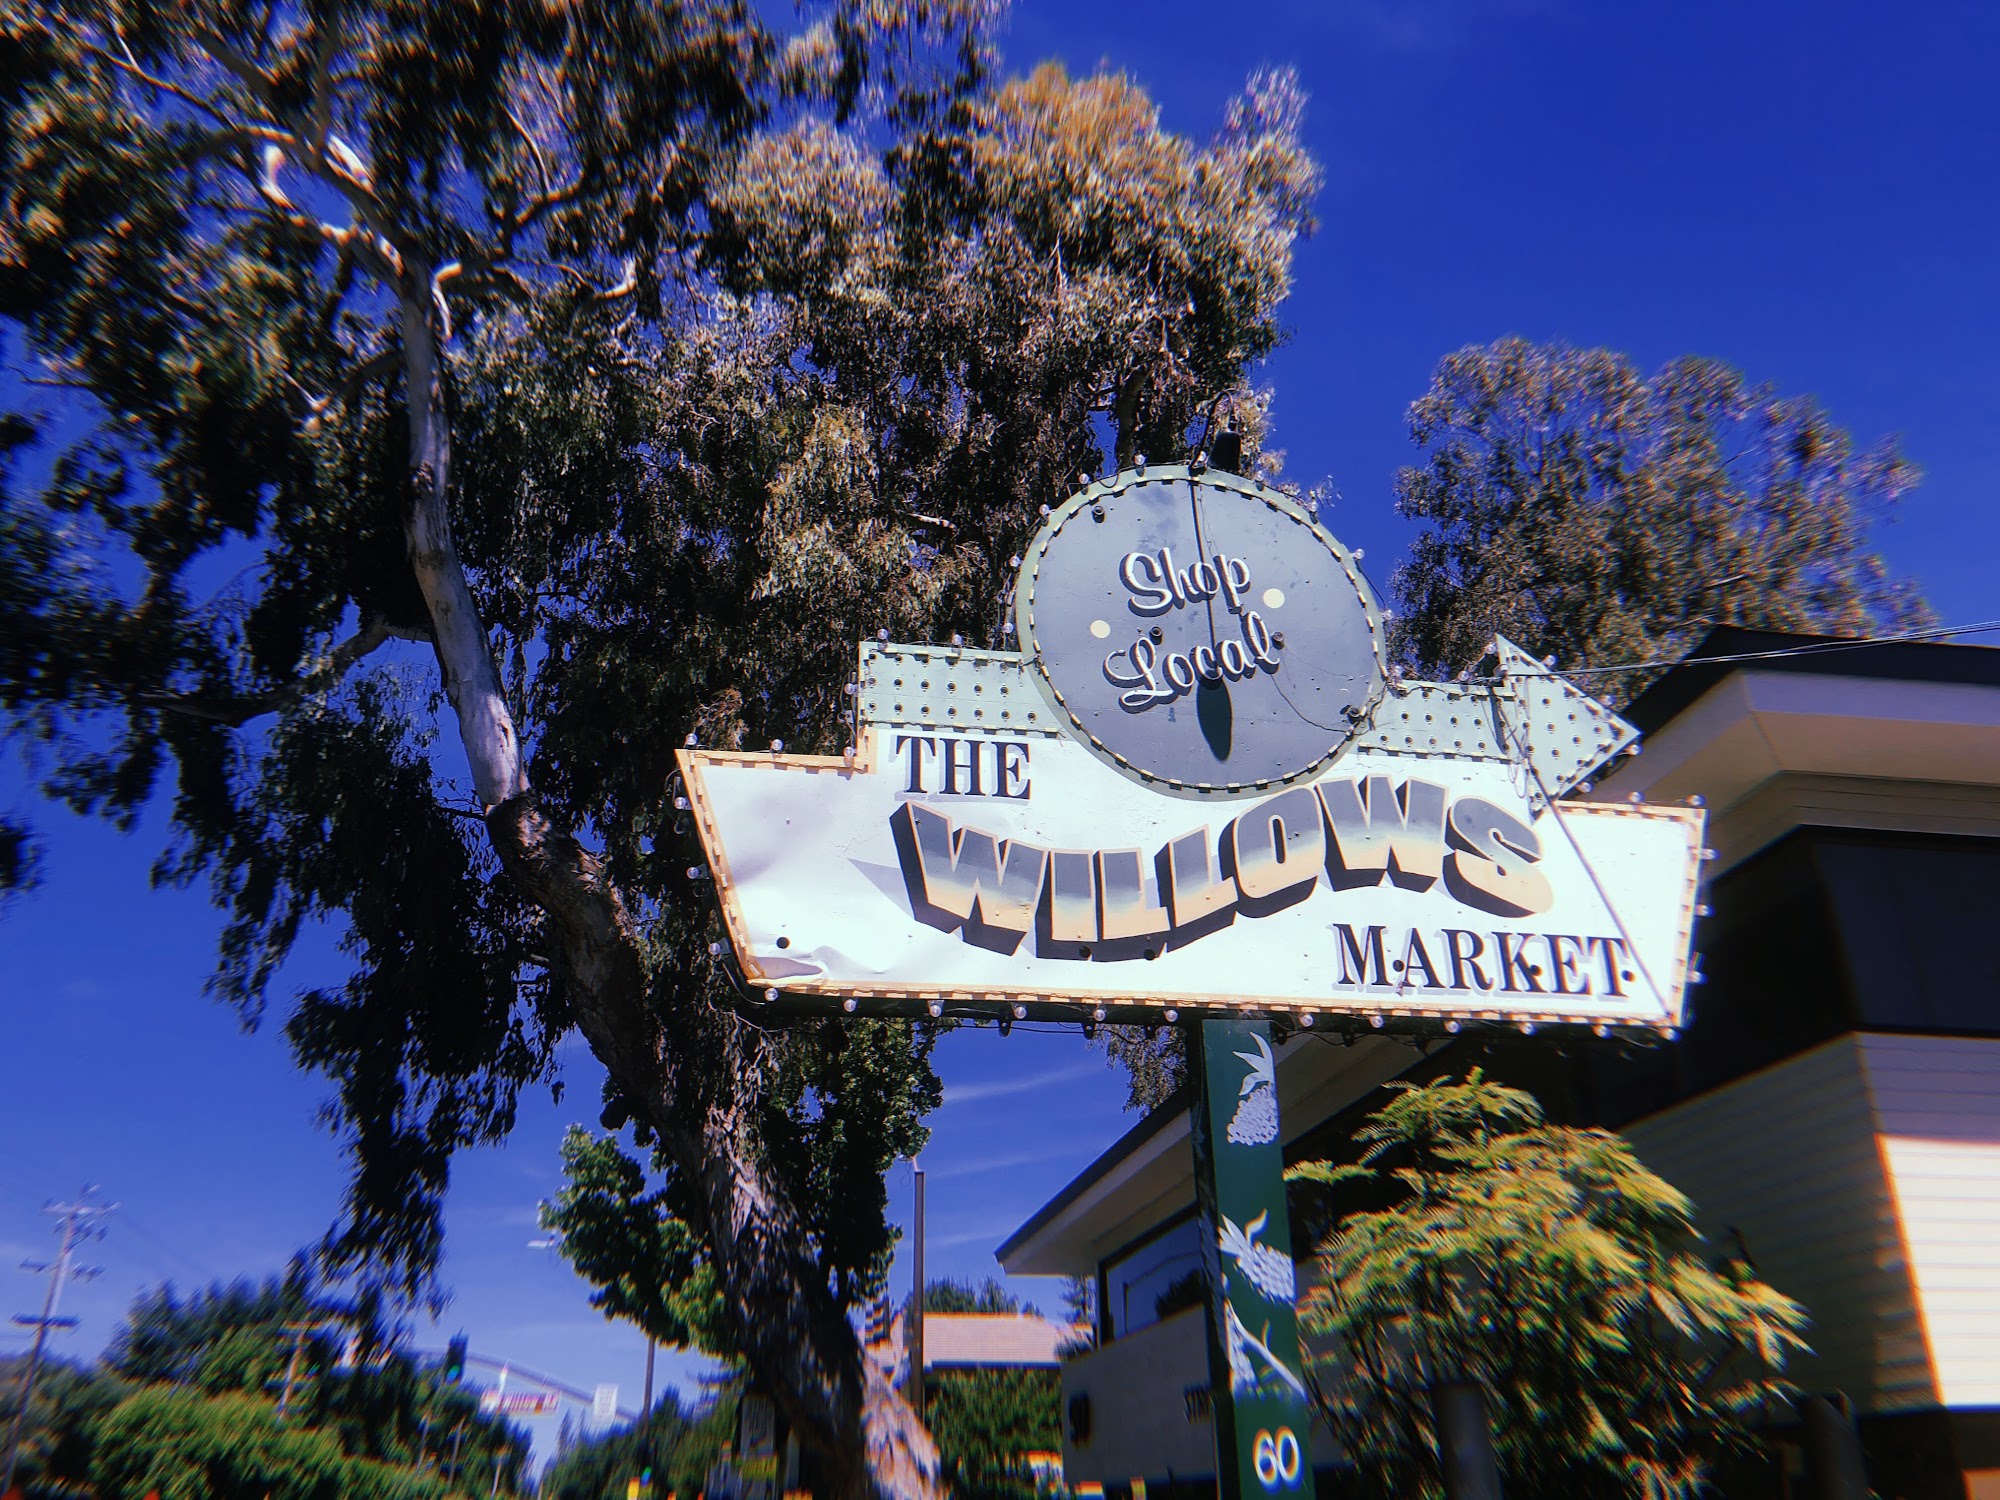 The Willows Market